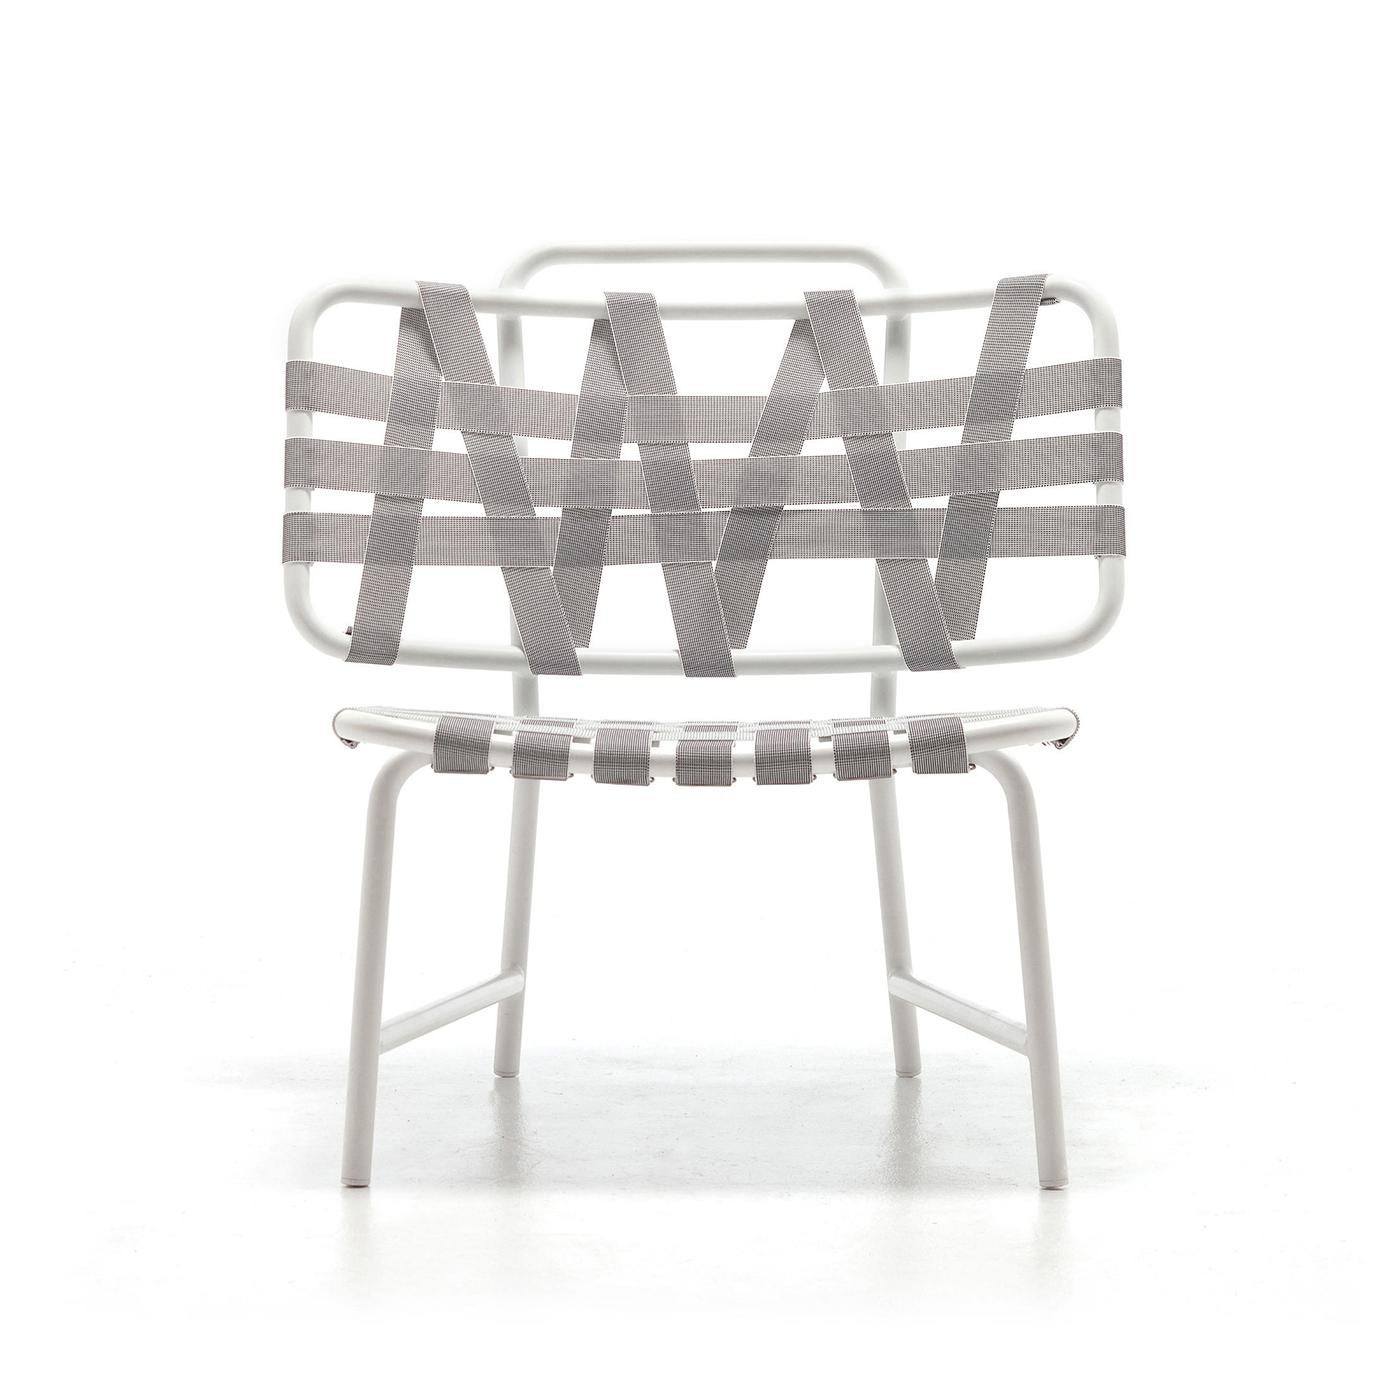 Chair Weaving with aluminium structure in white lacquered finish.
Seat and back made with light grey elastic belts. Indoor or outdoor use.
Also available with structure in blue lacquered finish with blue elastic belts
or with structure in dark